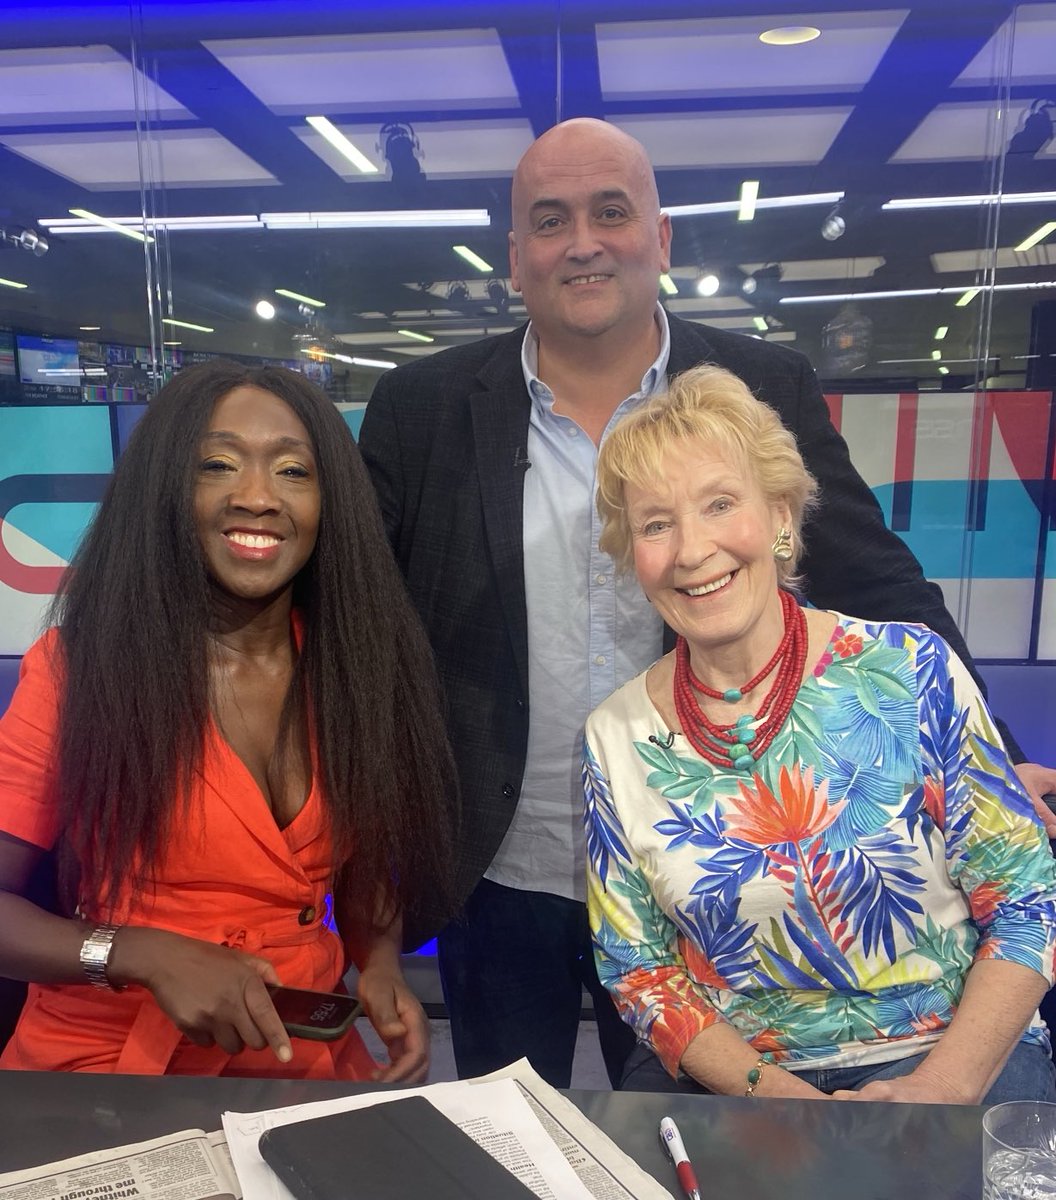 Another happy afternoon with ⁦@Nanaakua1⁩ #DannyKelly on ⁦@GBNEWS⁩